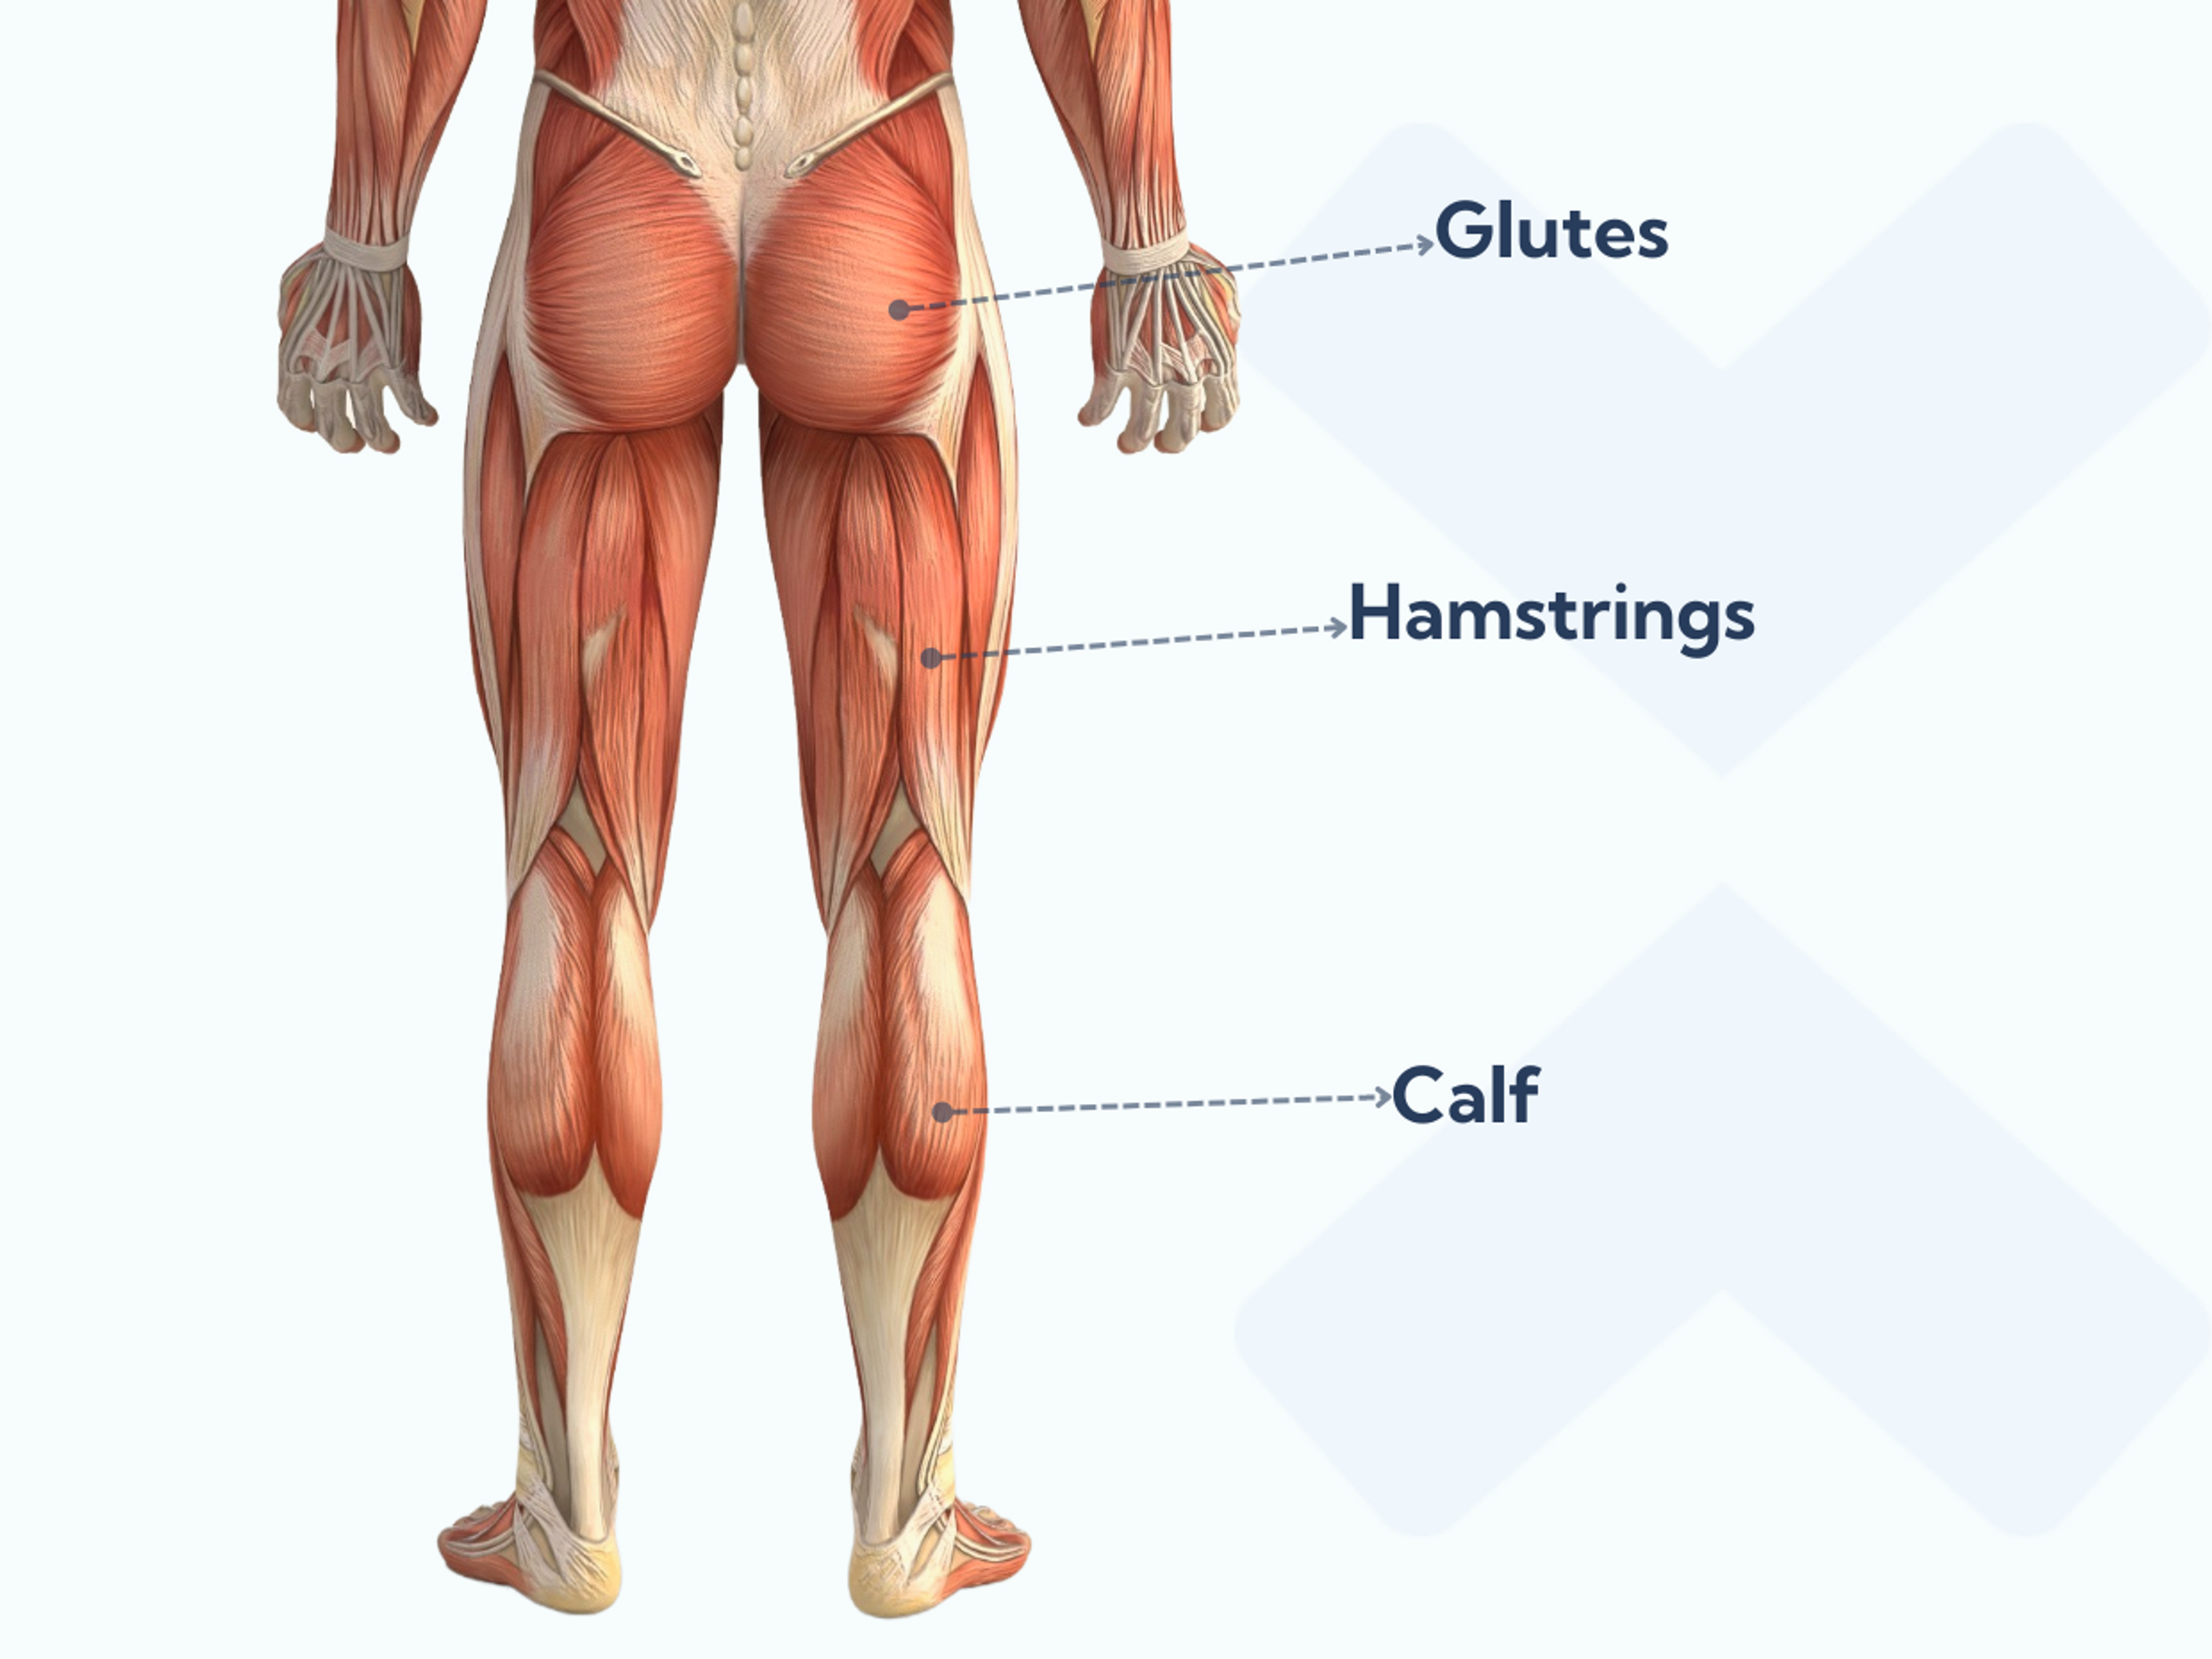 The posterior chain is a thick interconnected layer of fascia (connective tissue), muscles, and tendons in the back of your legs that runs between your lower back and feet. The muscles relevant to plantar fasciitis include your glutes, hamstrings, and calves.